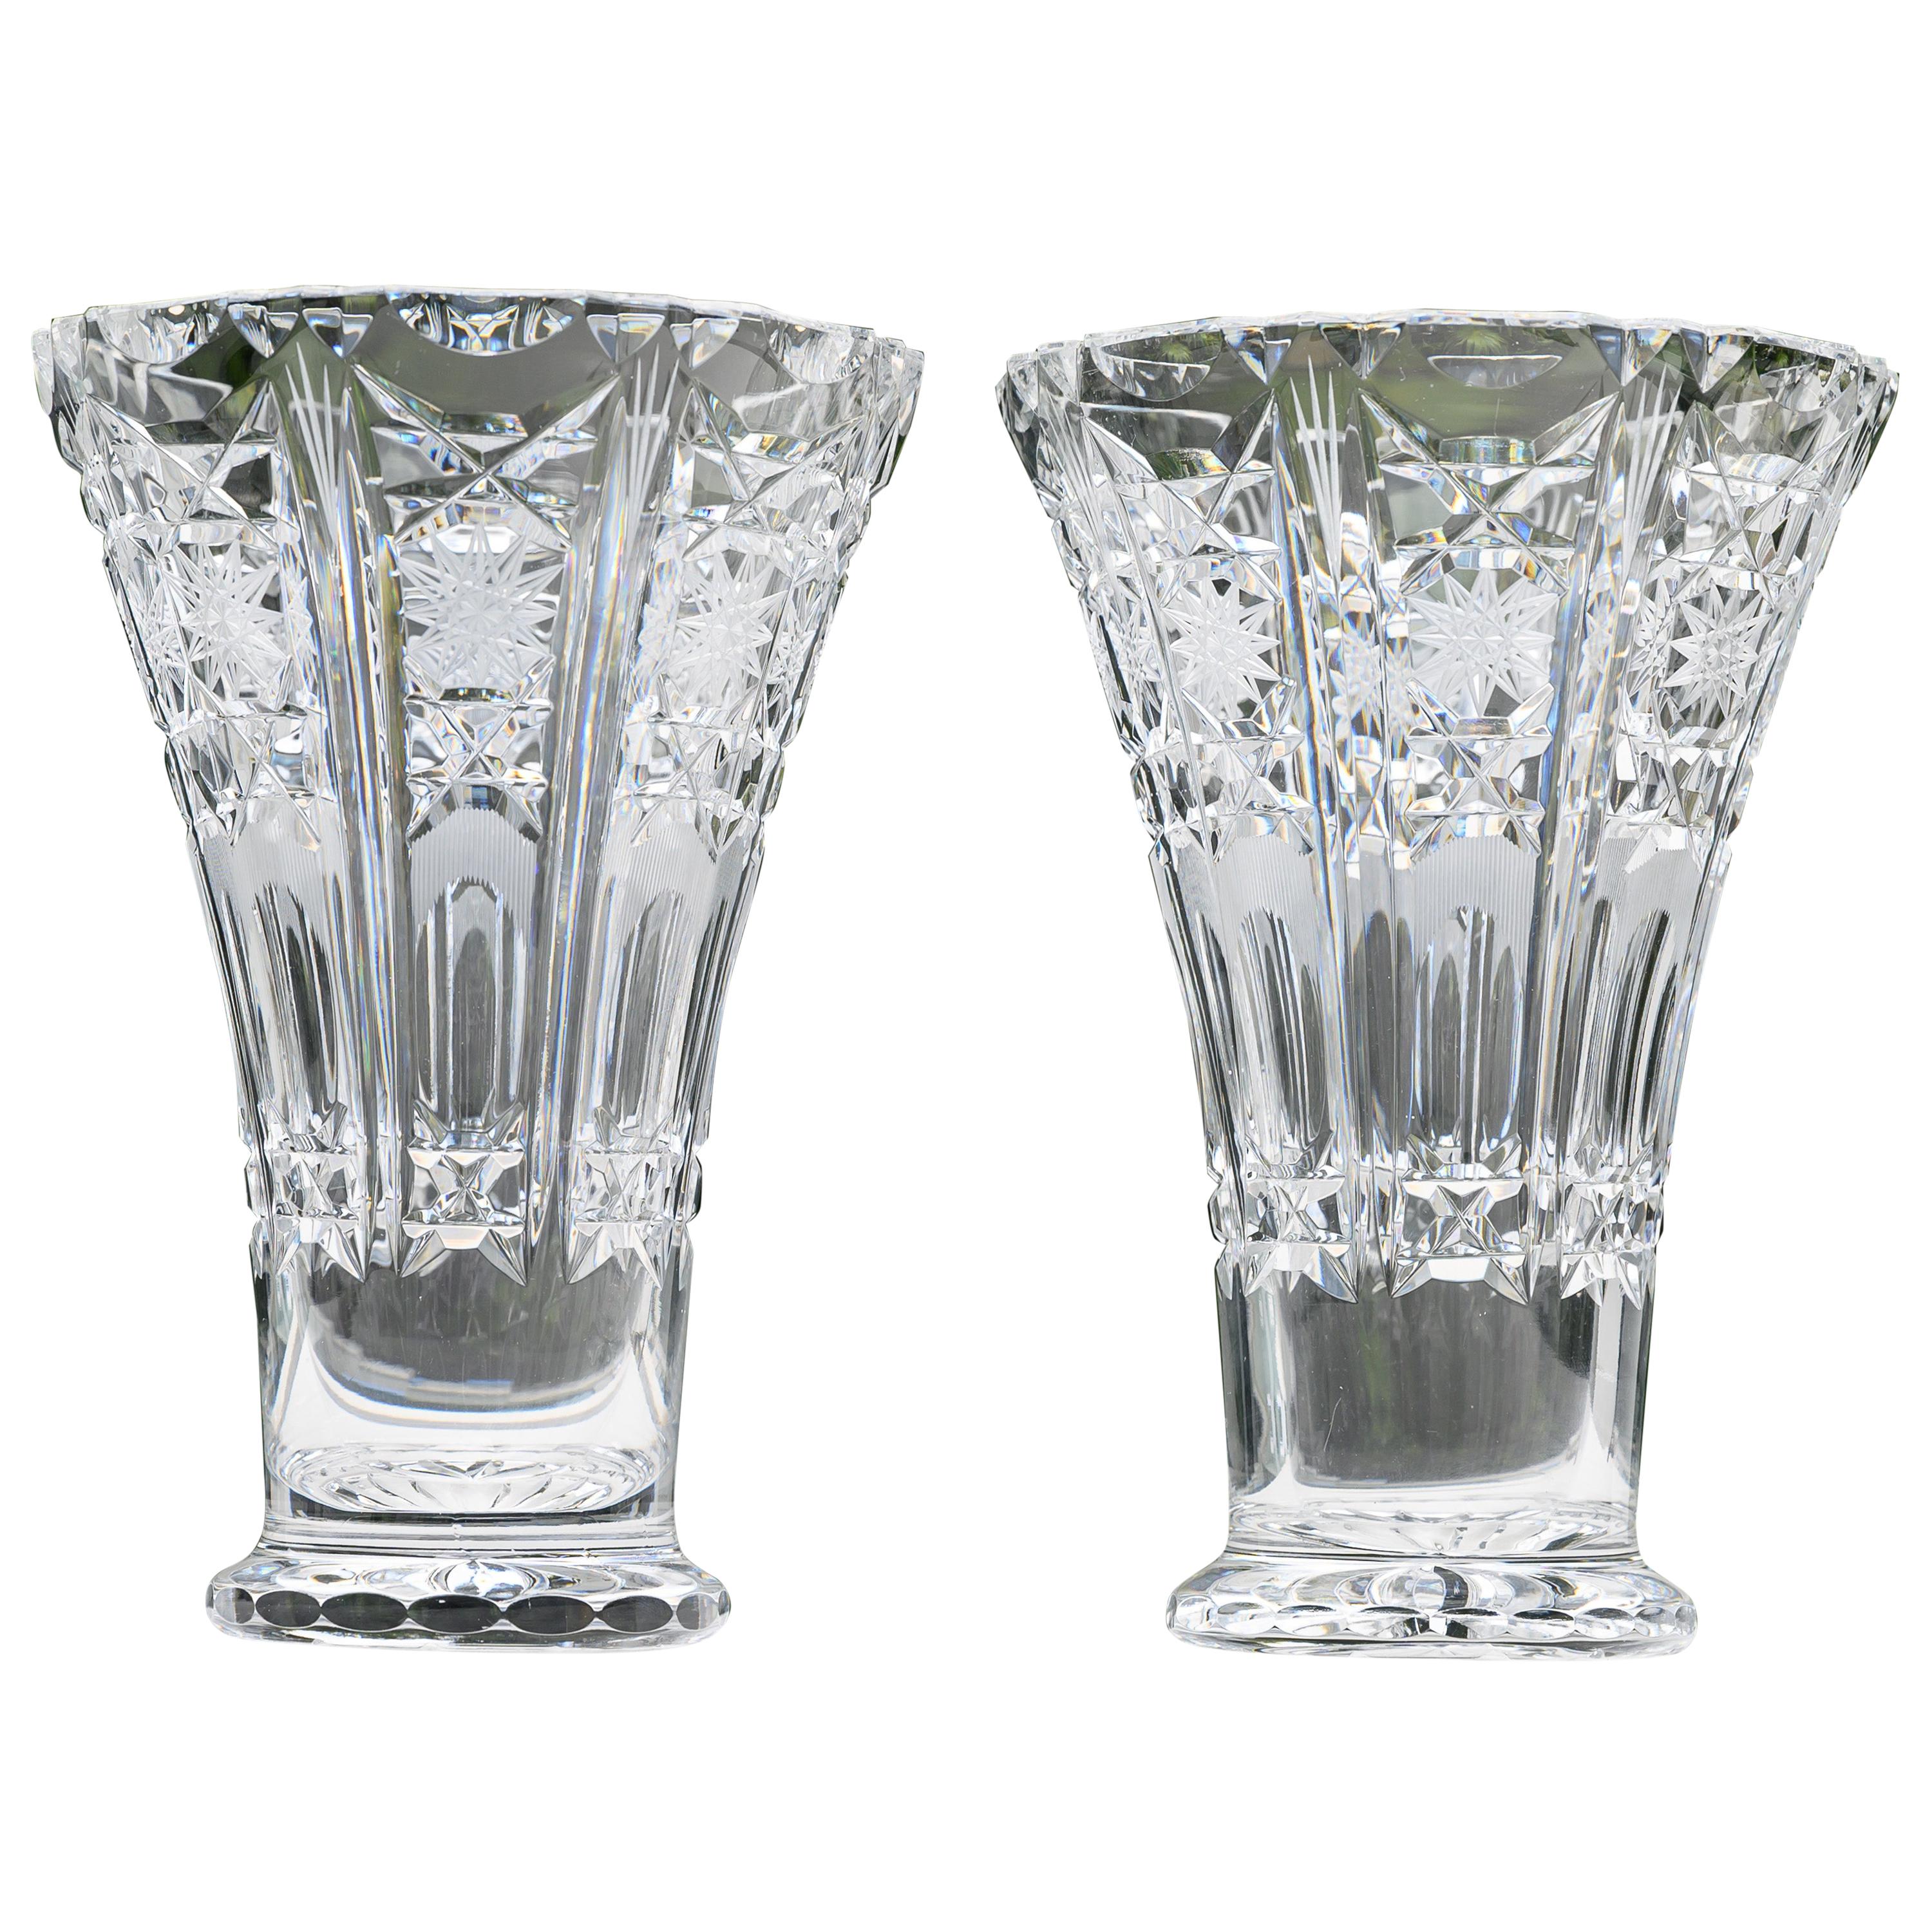 Pair of French Crystal Vases Attributed to Baccarat